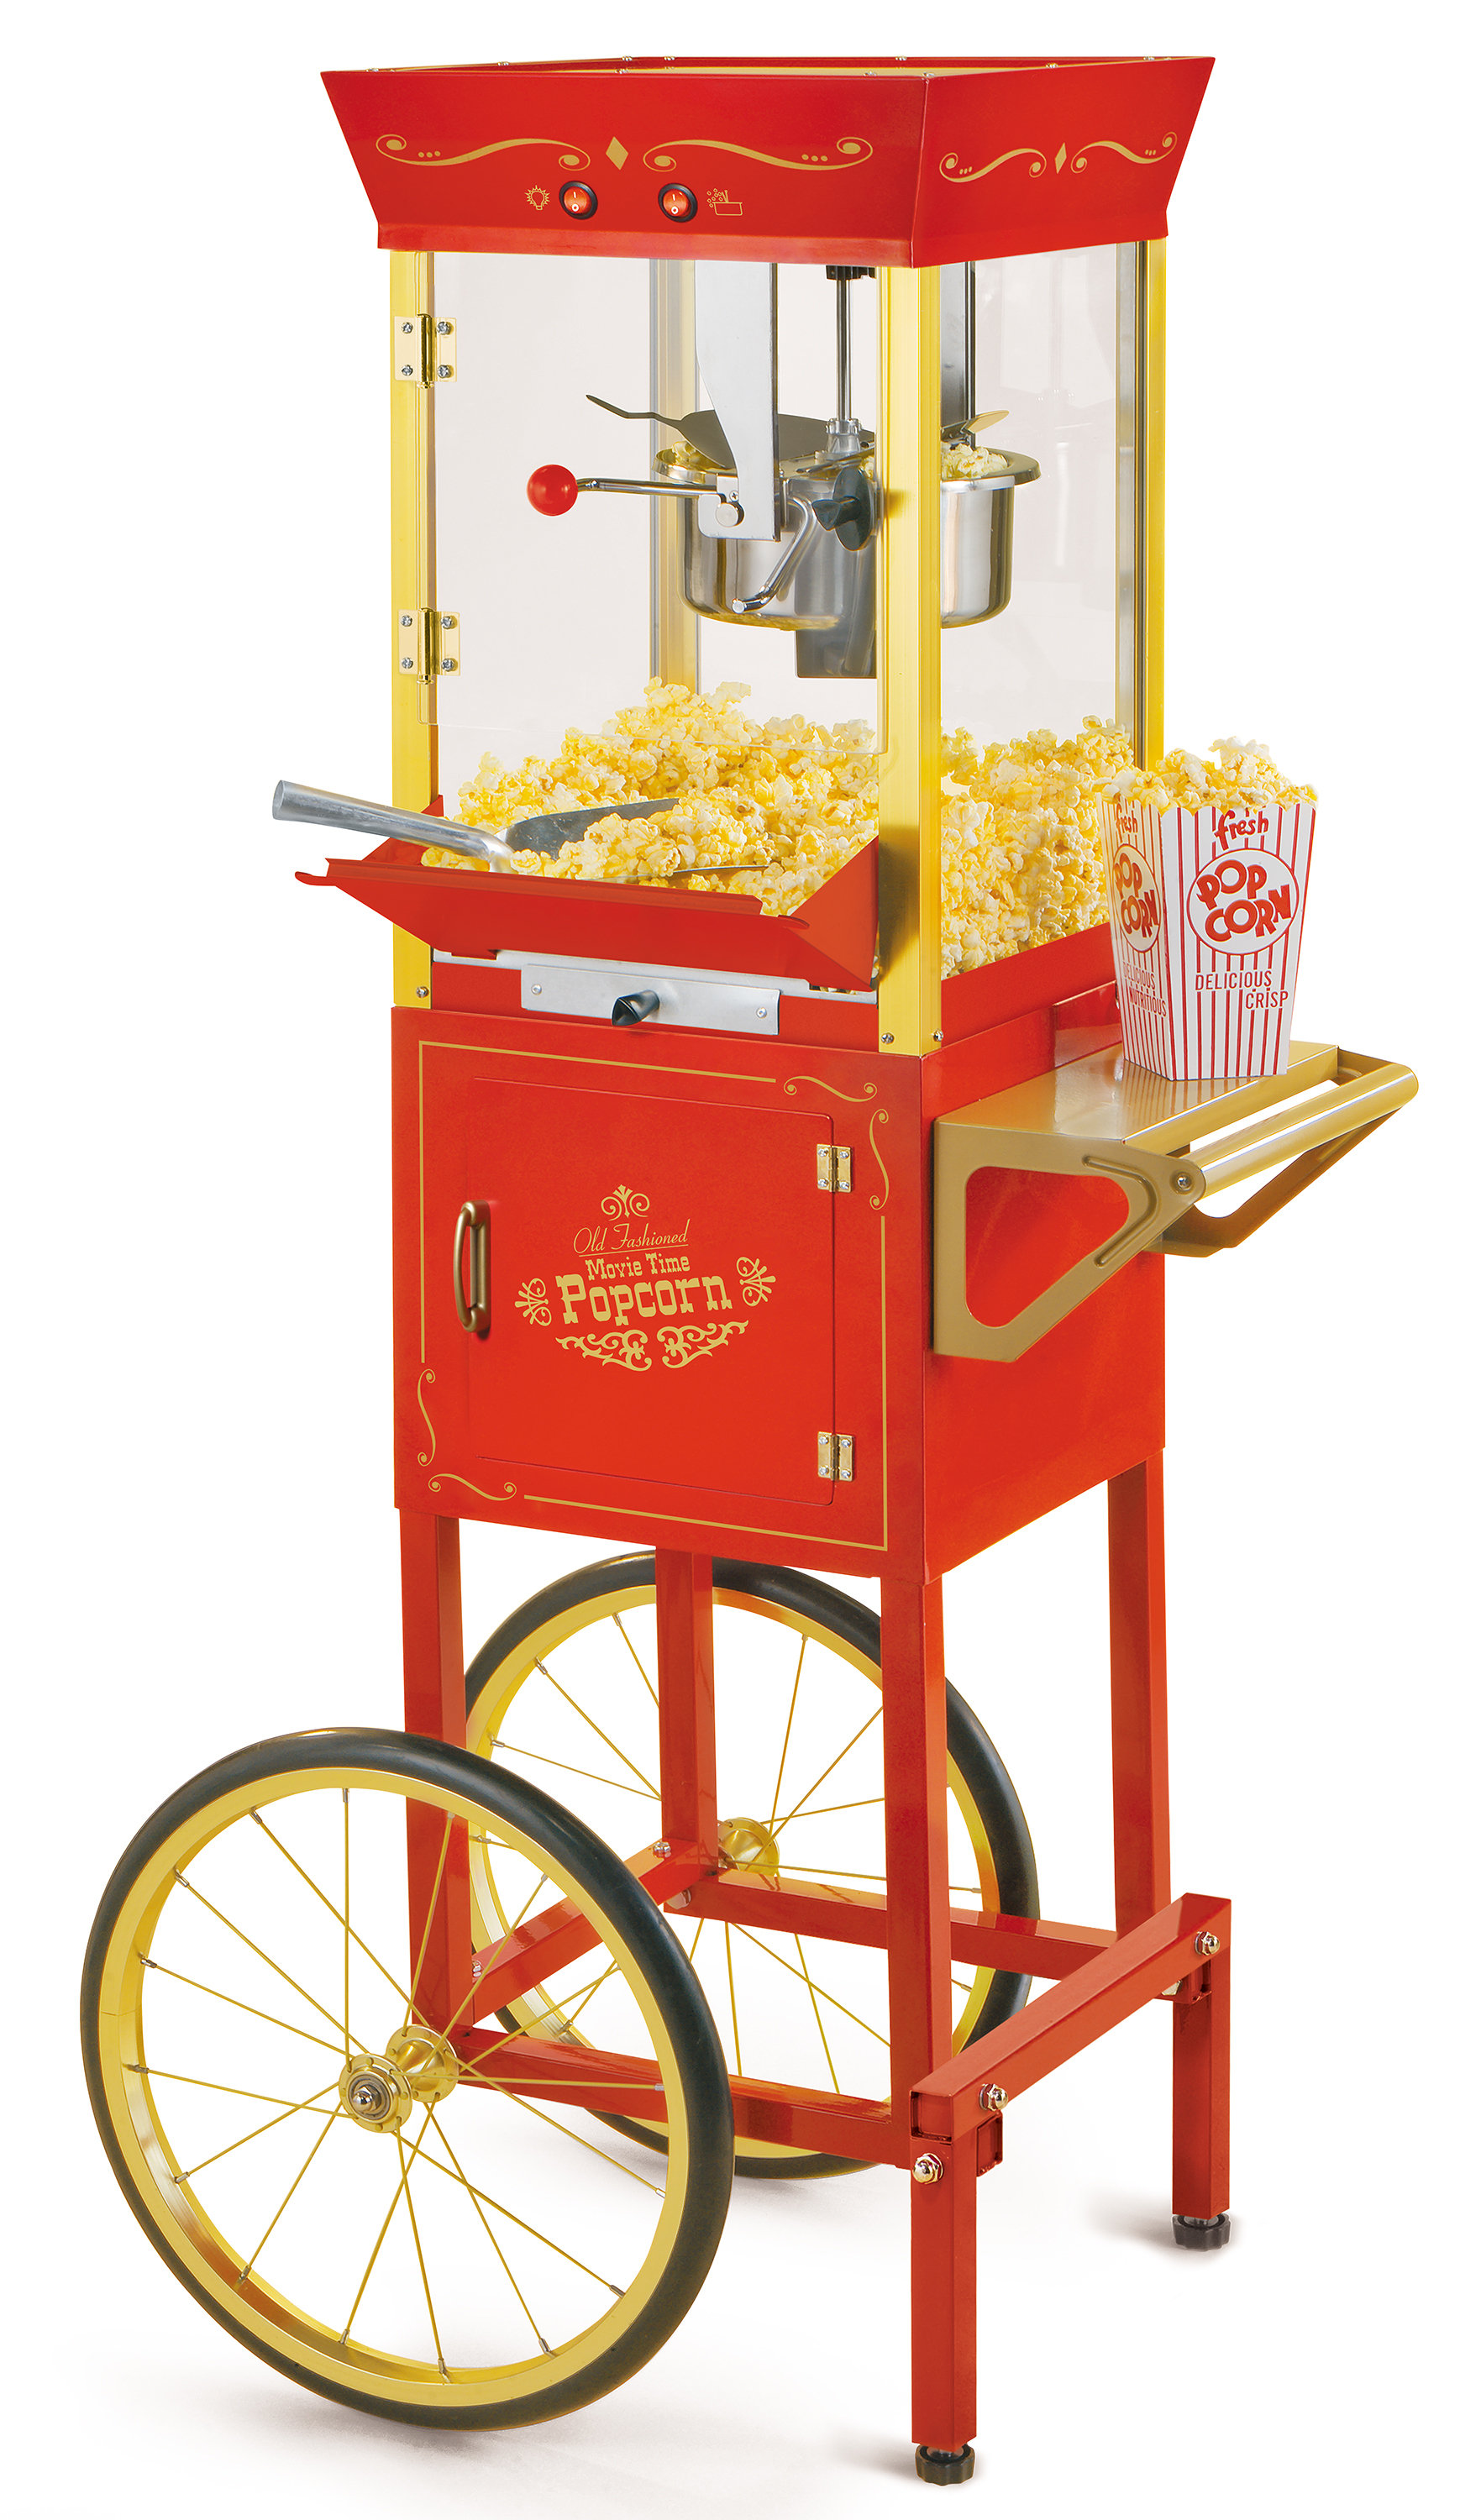 Great Northern Popcorn 1 Cups Oil Popcorn Machine Popcorn Maker Cart in the Popcorn  Machines department at